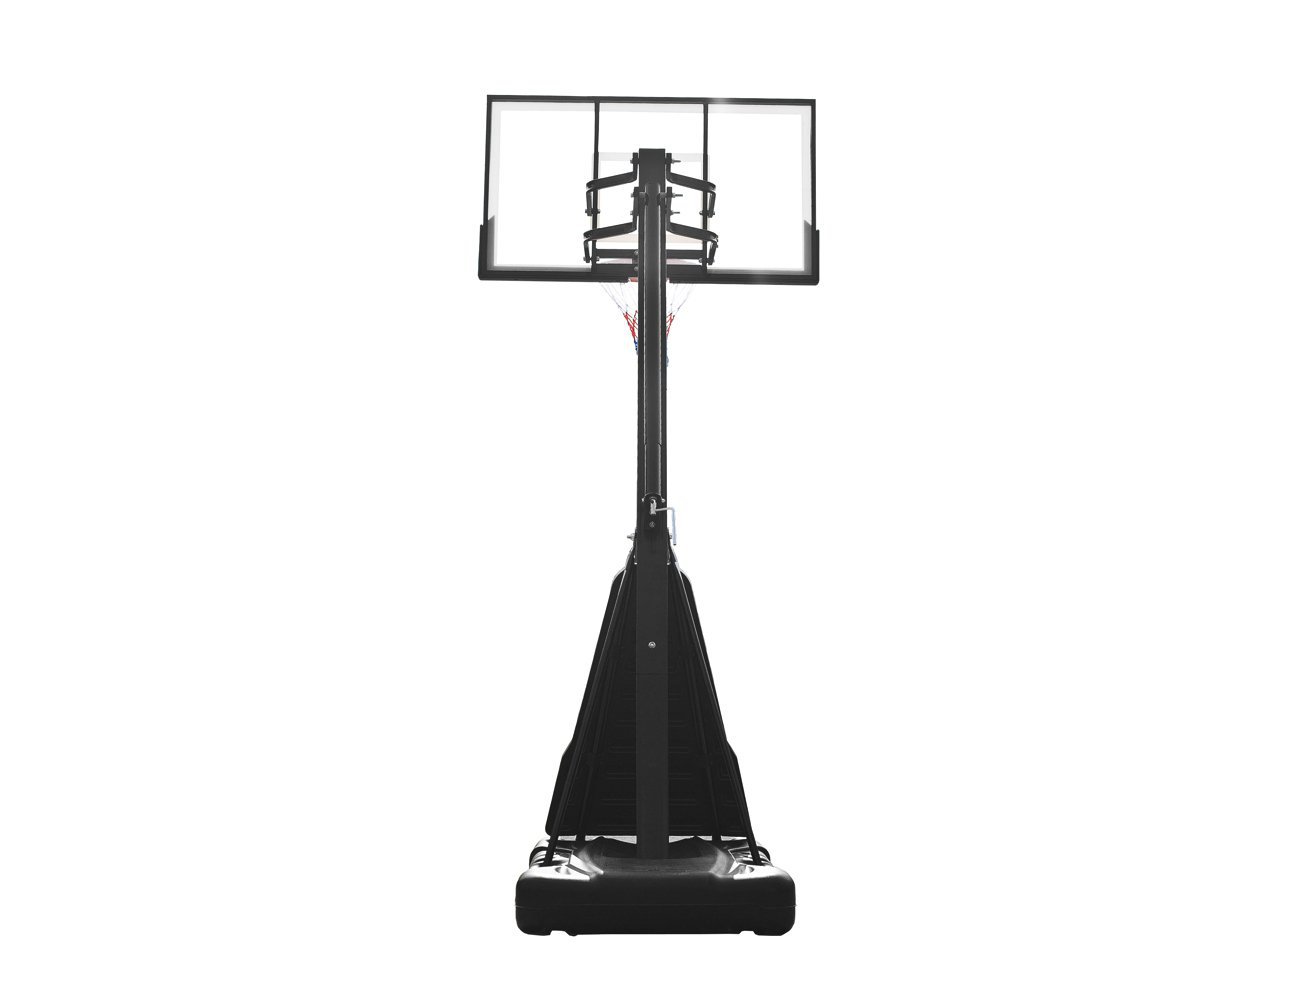 Basketball Stand @ Crazy Sales - We have the best daily deals online!